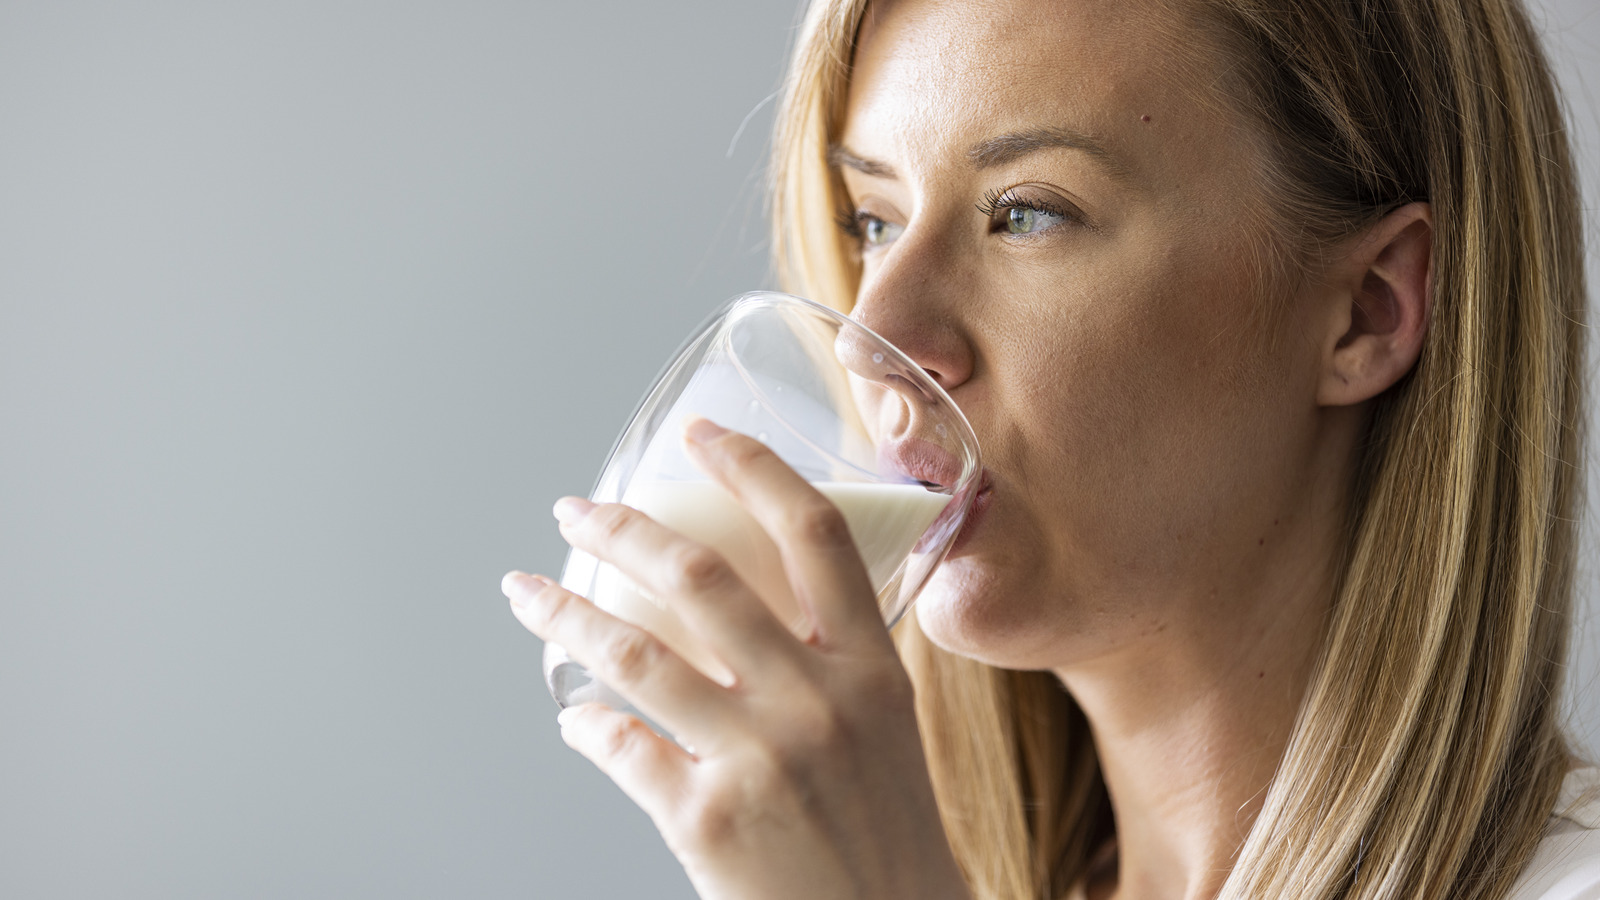 Here's What Happens When You Take A Sip Of Spoiled Milk - Health Digest